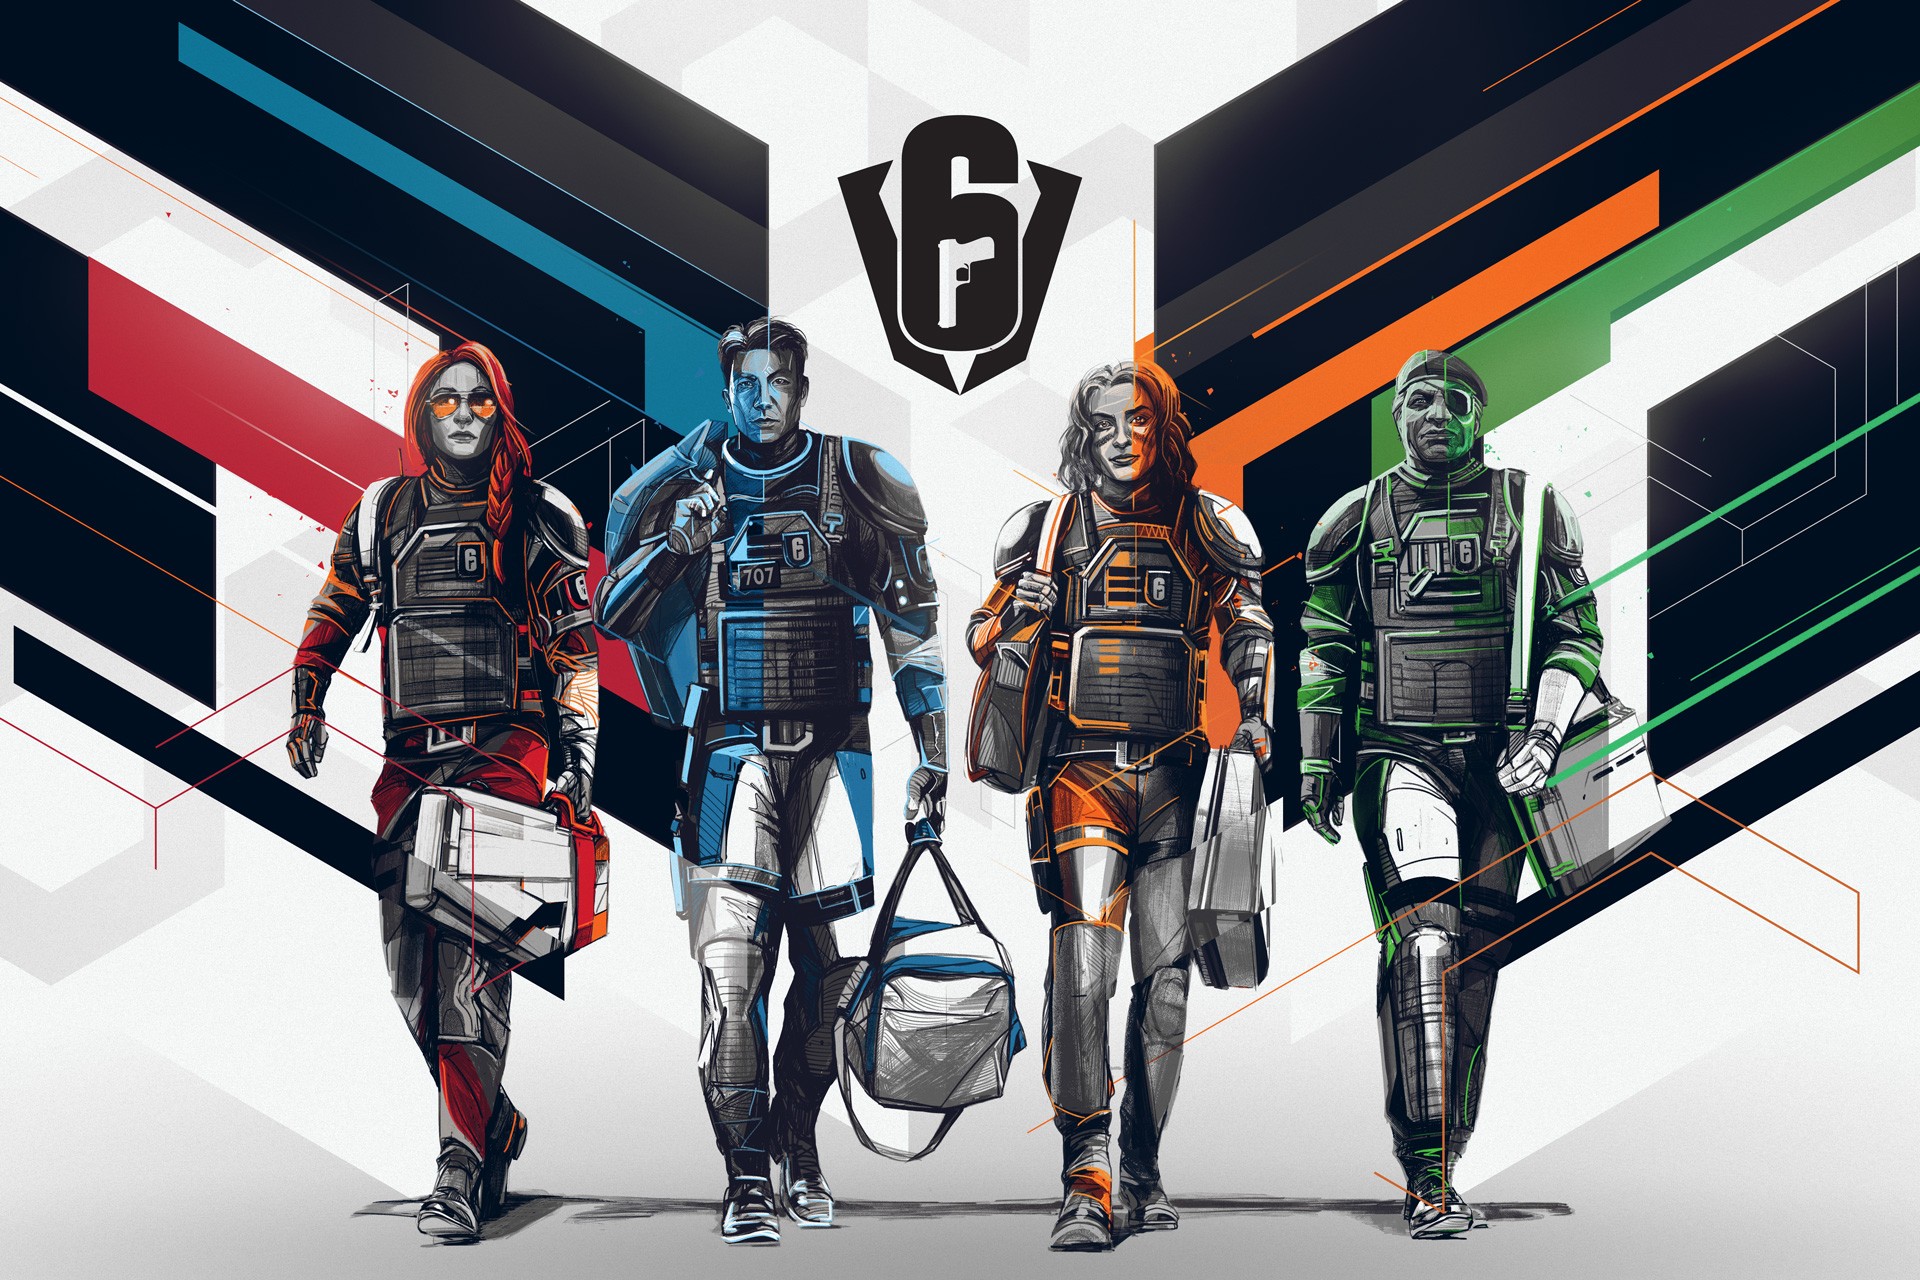 Video For Rainbow Six Siege Road to Six Invitational Event is Underway